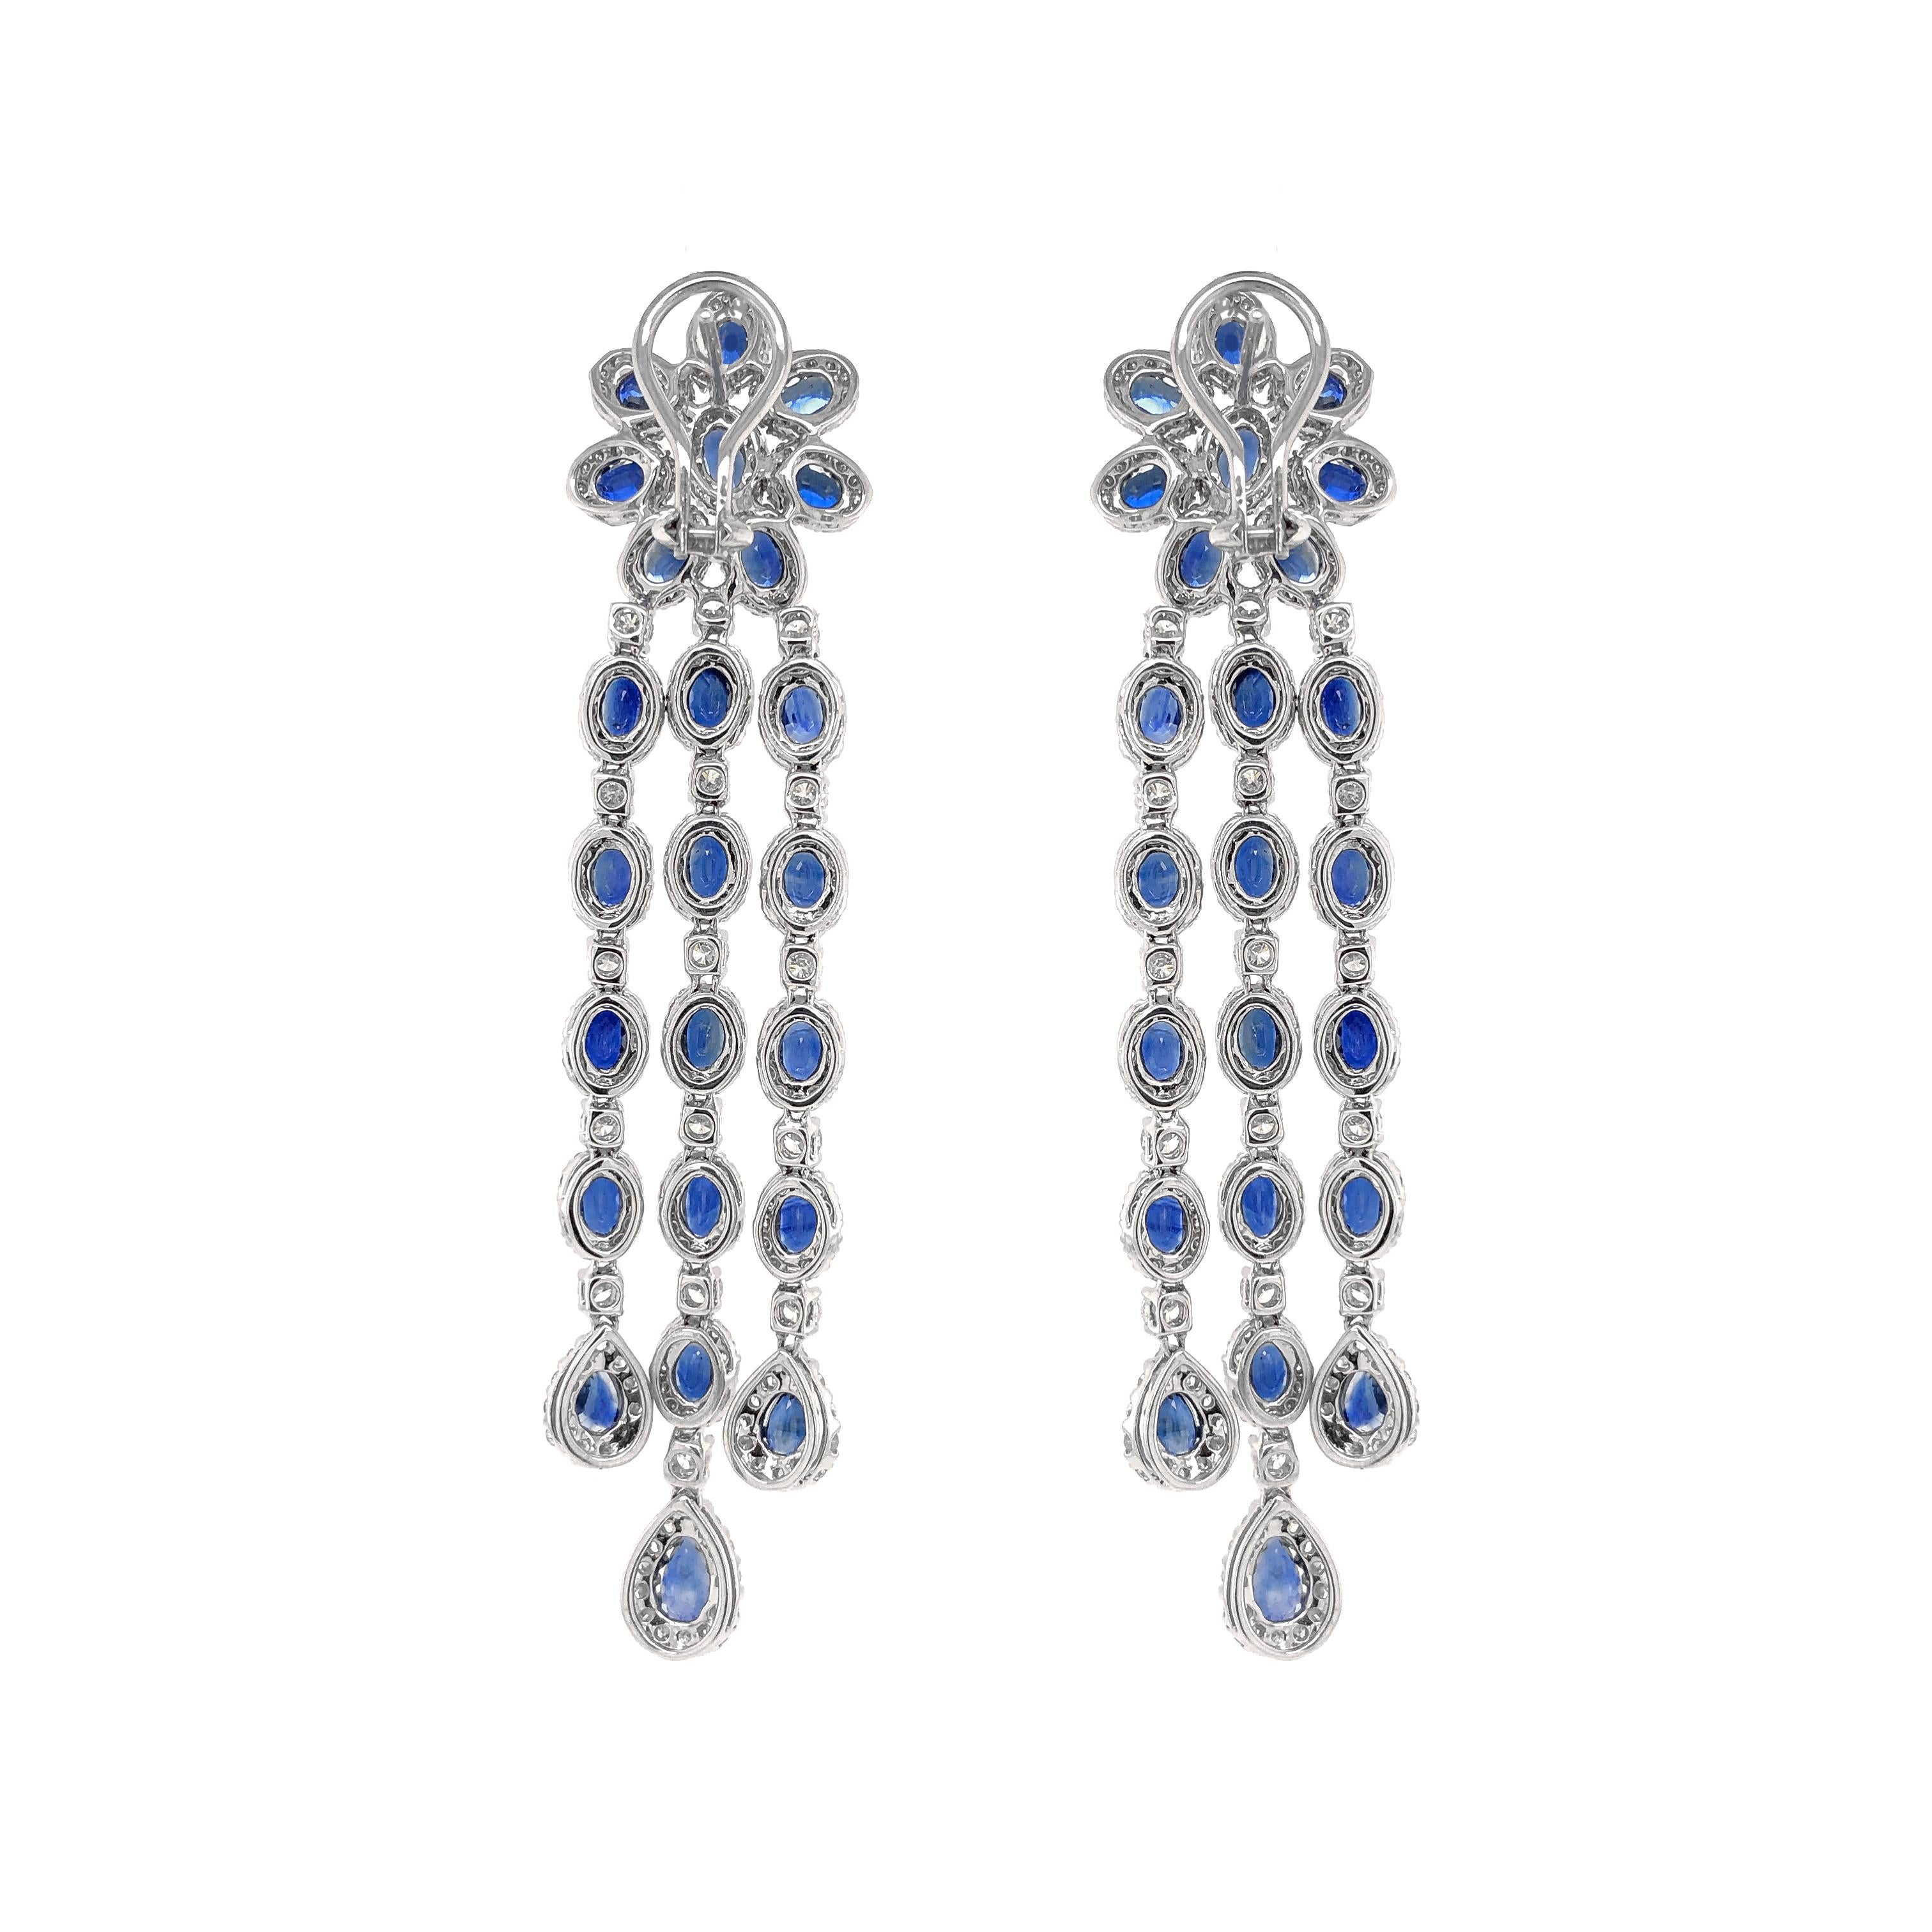 Handcrafted 18 karat gold chandelier earrings.
Ceylon pear cut blue sapphires 20.55 ct.
Accented with small round white diamonds 5.48 ct.
Diamonds are all natural in G-H Color Clarity VS. 
French / Omega clips.
Width: 1.7 cm
Height: 8.5 cm
Weight: